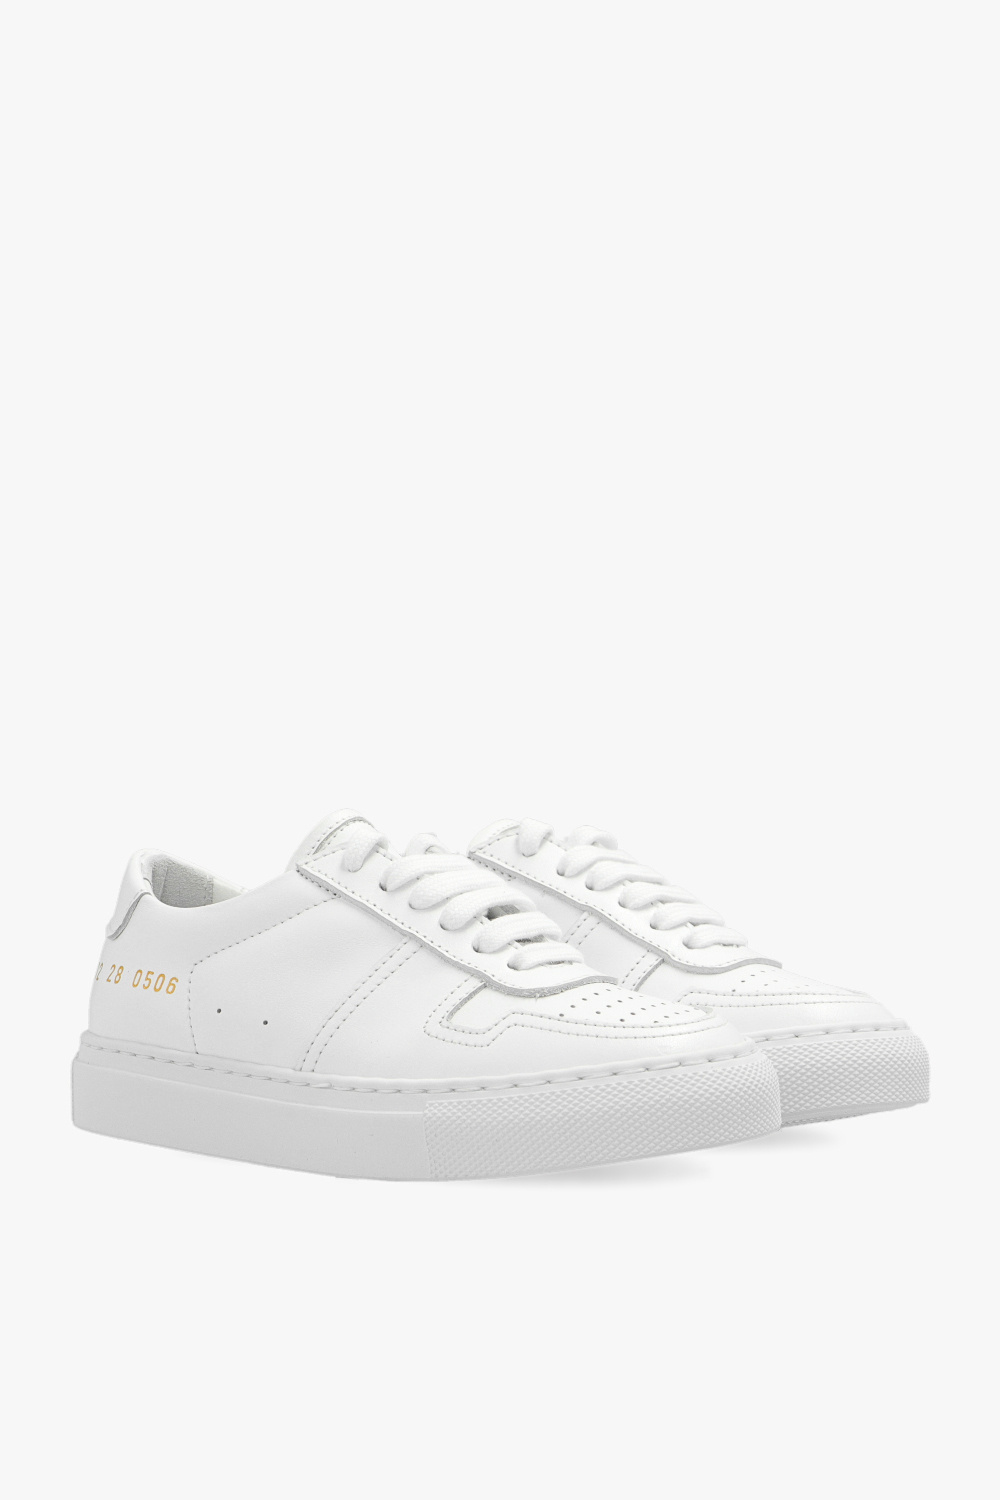 Common Projects Kids ‘Bball Low’ sneakers